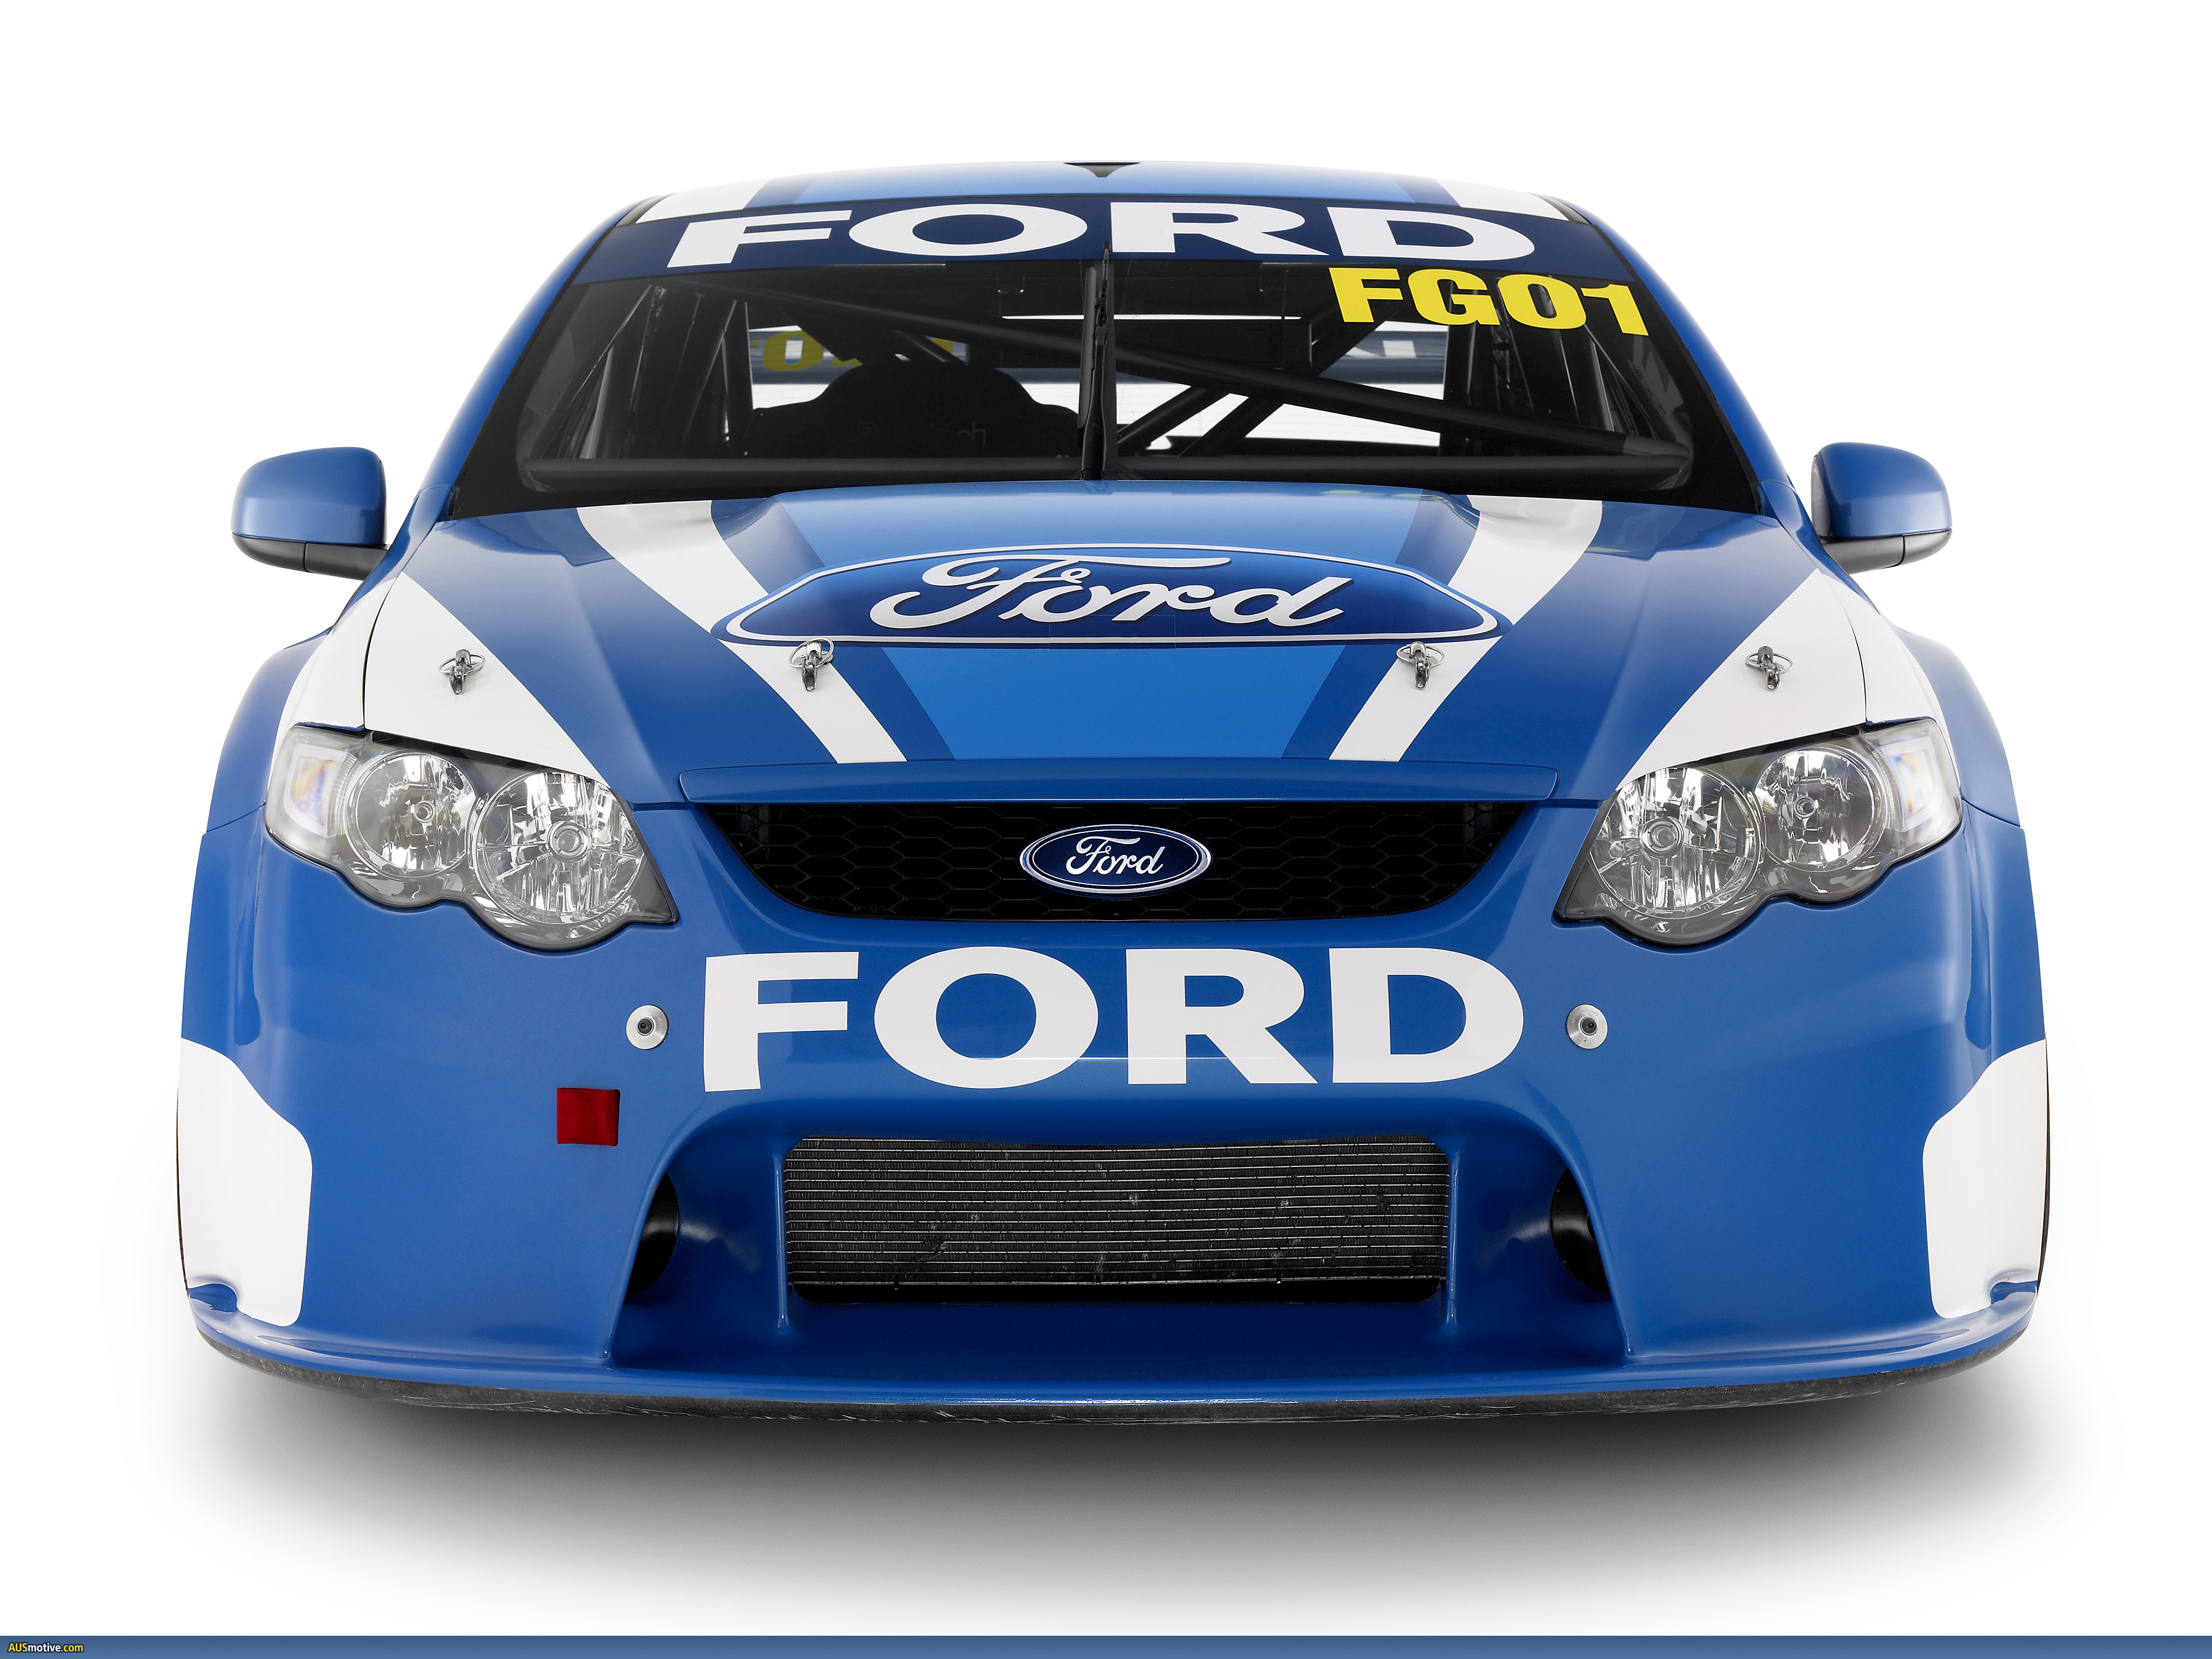 Download Ford Racing wallpaper Ford FG01 Racing